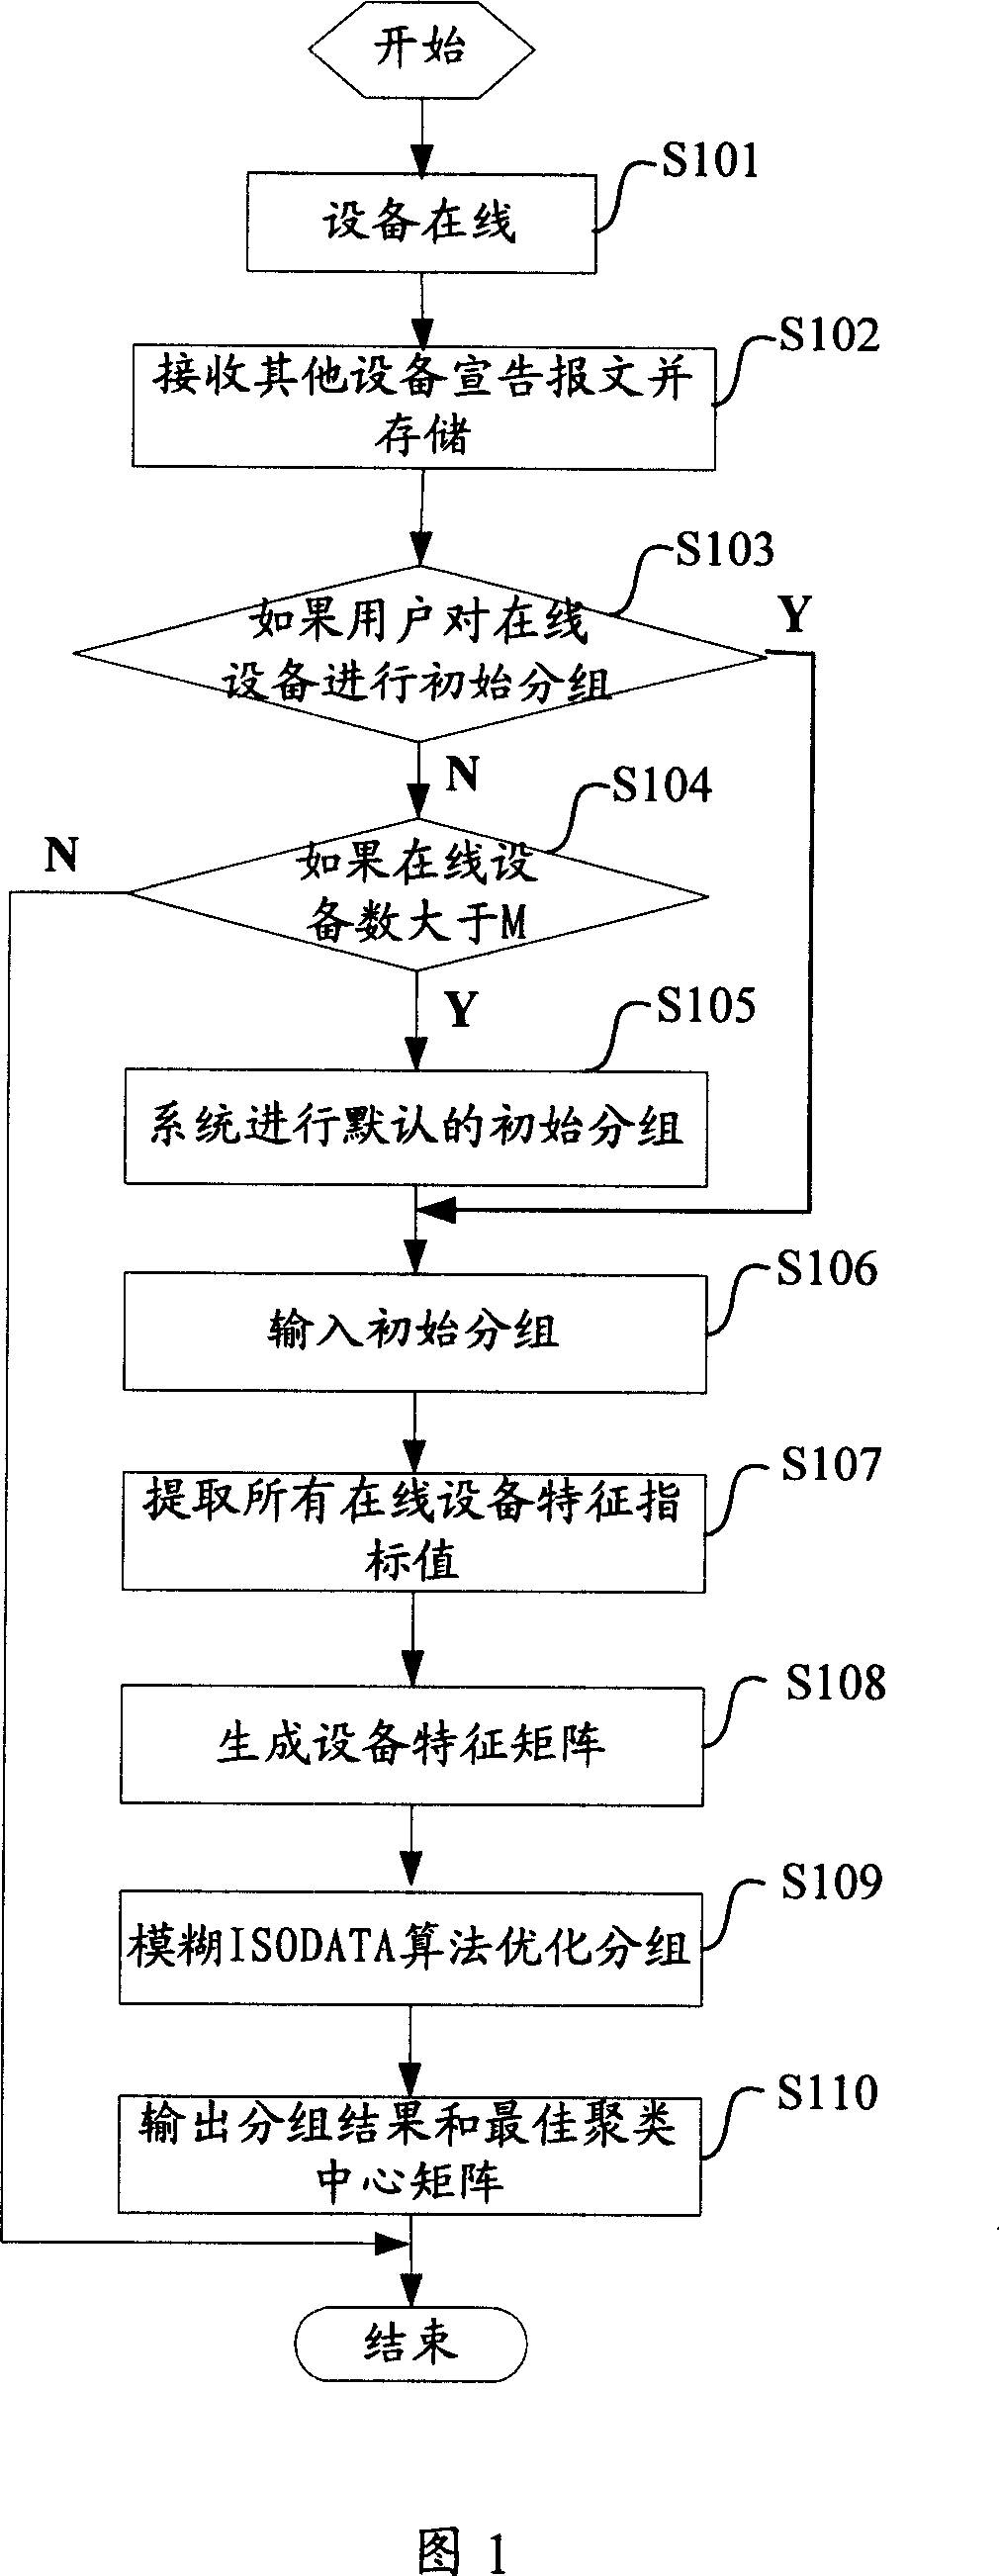 A digital family network equipment automatic grouping method